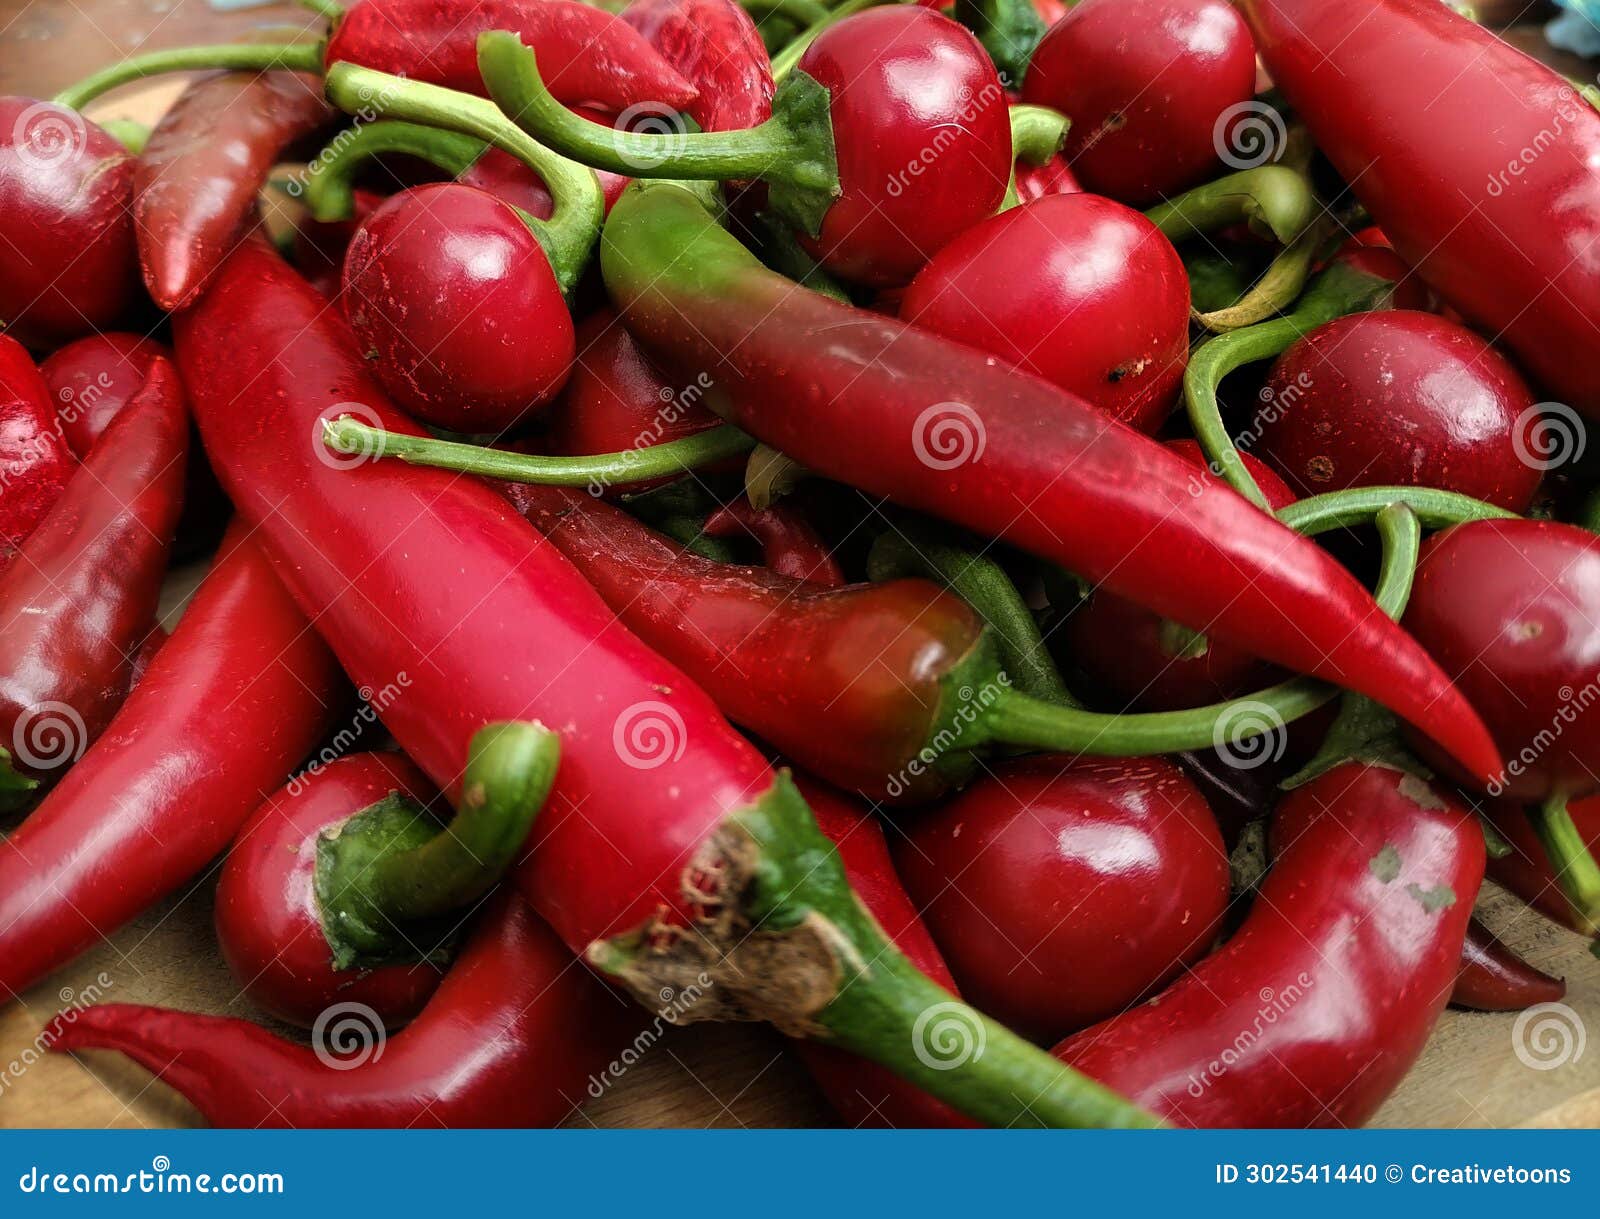 pile red hot peppers on wooden table close up. hot peppers background. cherry peppers and italian long hots